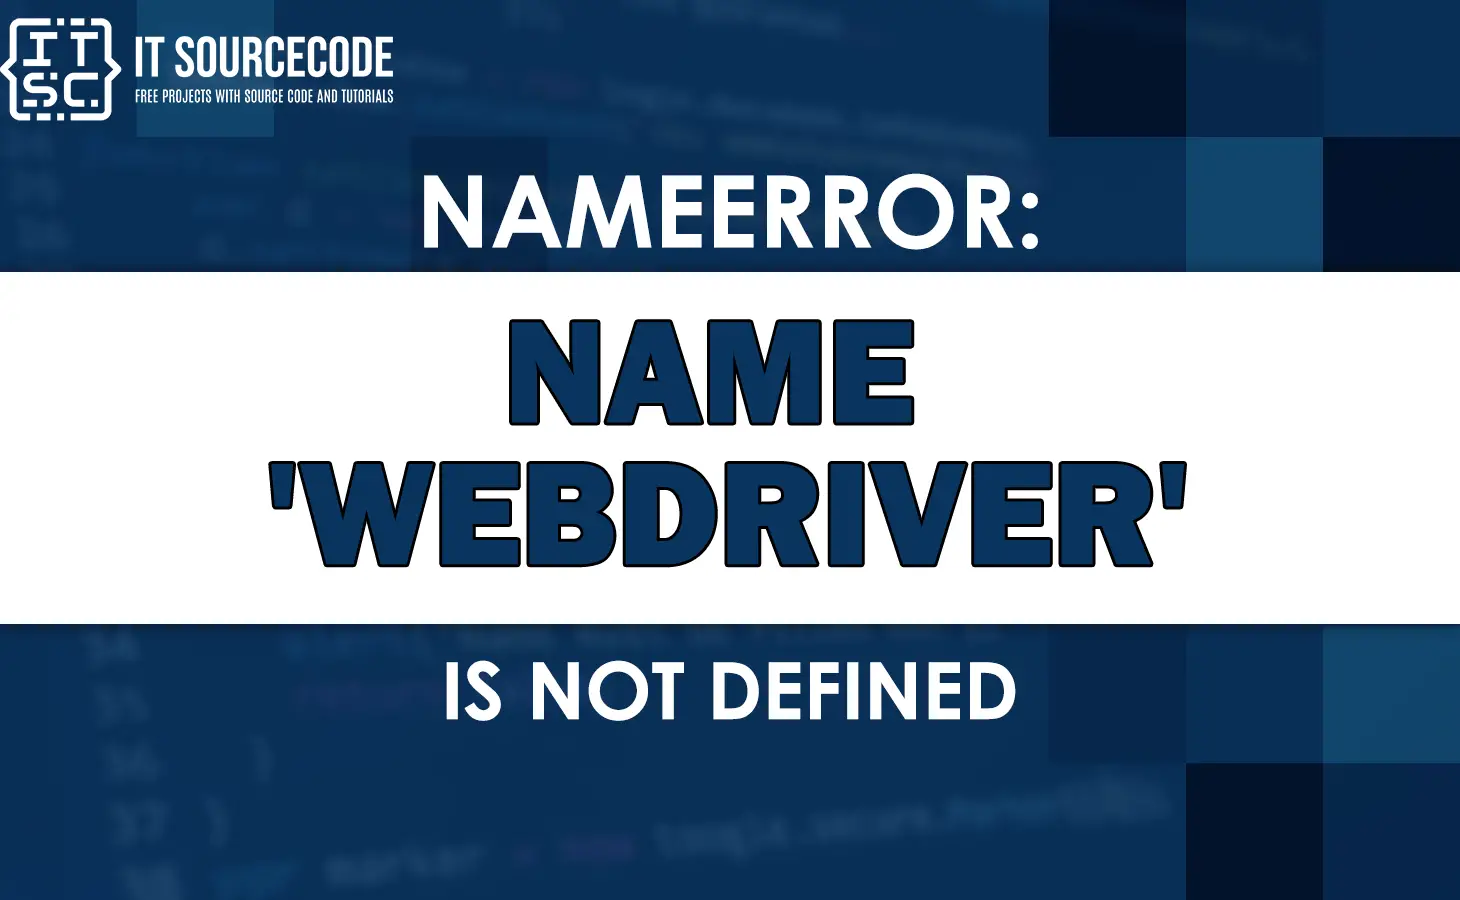 Nameerror: name 'webdriver' is not defined